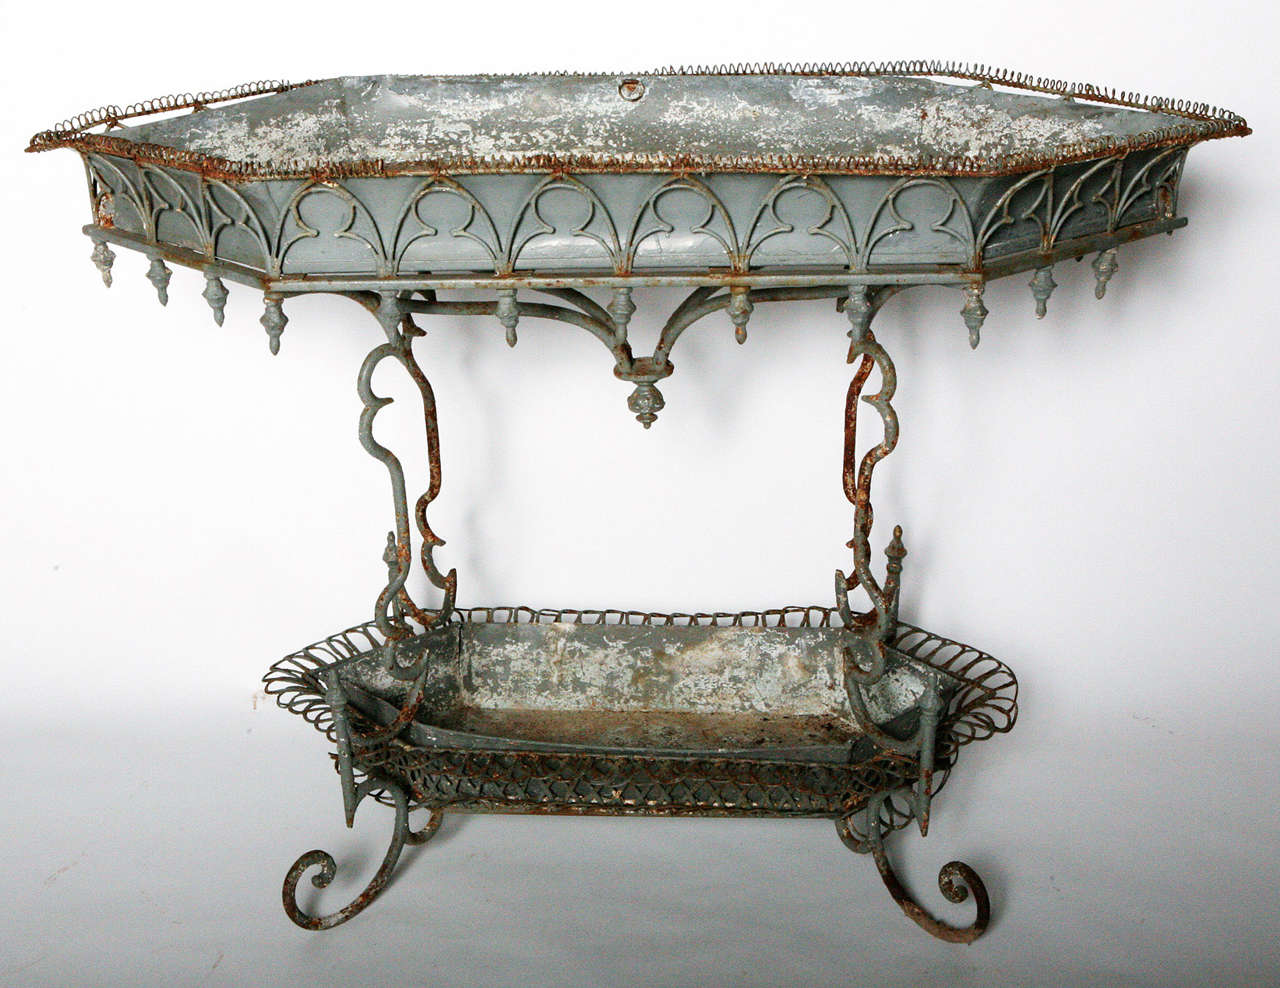 Wonderful two tiered iron plant stand with original liners.  Delicate french wire with gothic design, and gracious curved iron, and finial drops around the base of top tier.